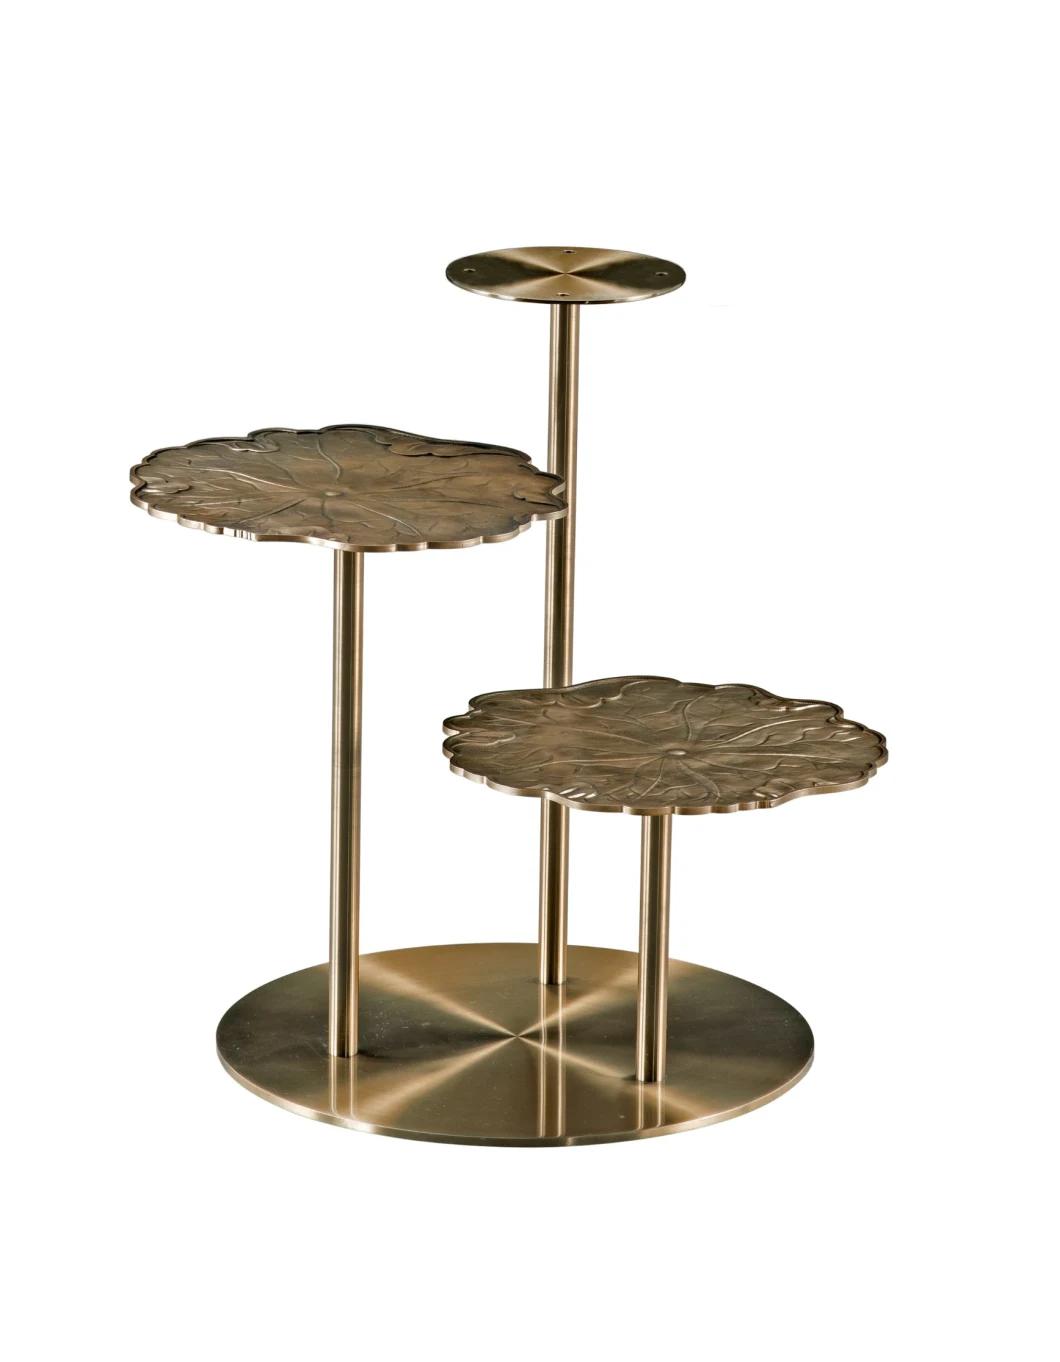 Modern Contemporary Luxury Decorative Gold Stainless Steel Marble Leisure Bedside Furniture Coffee Side Table